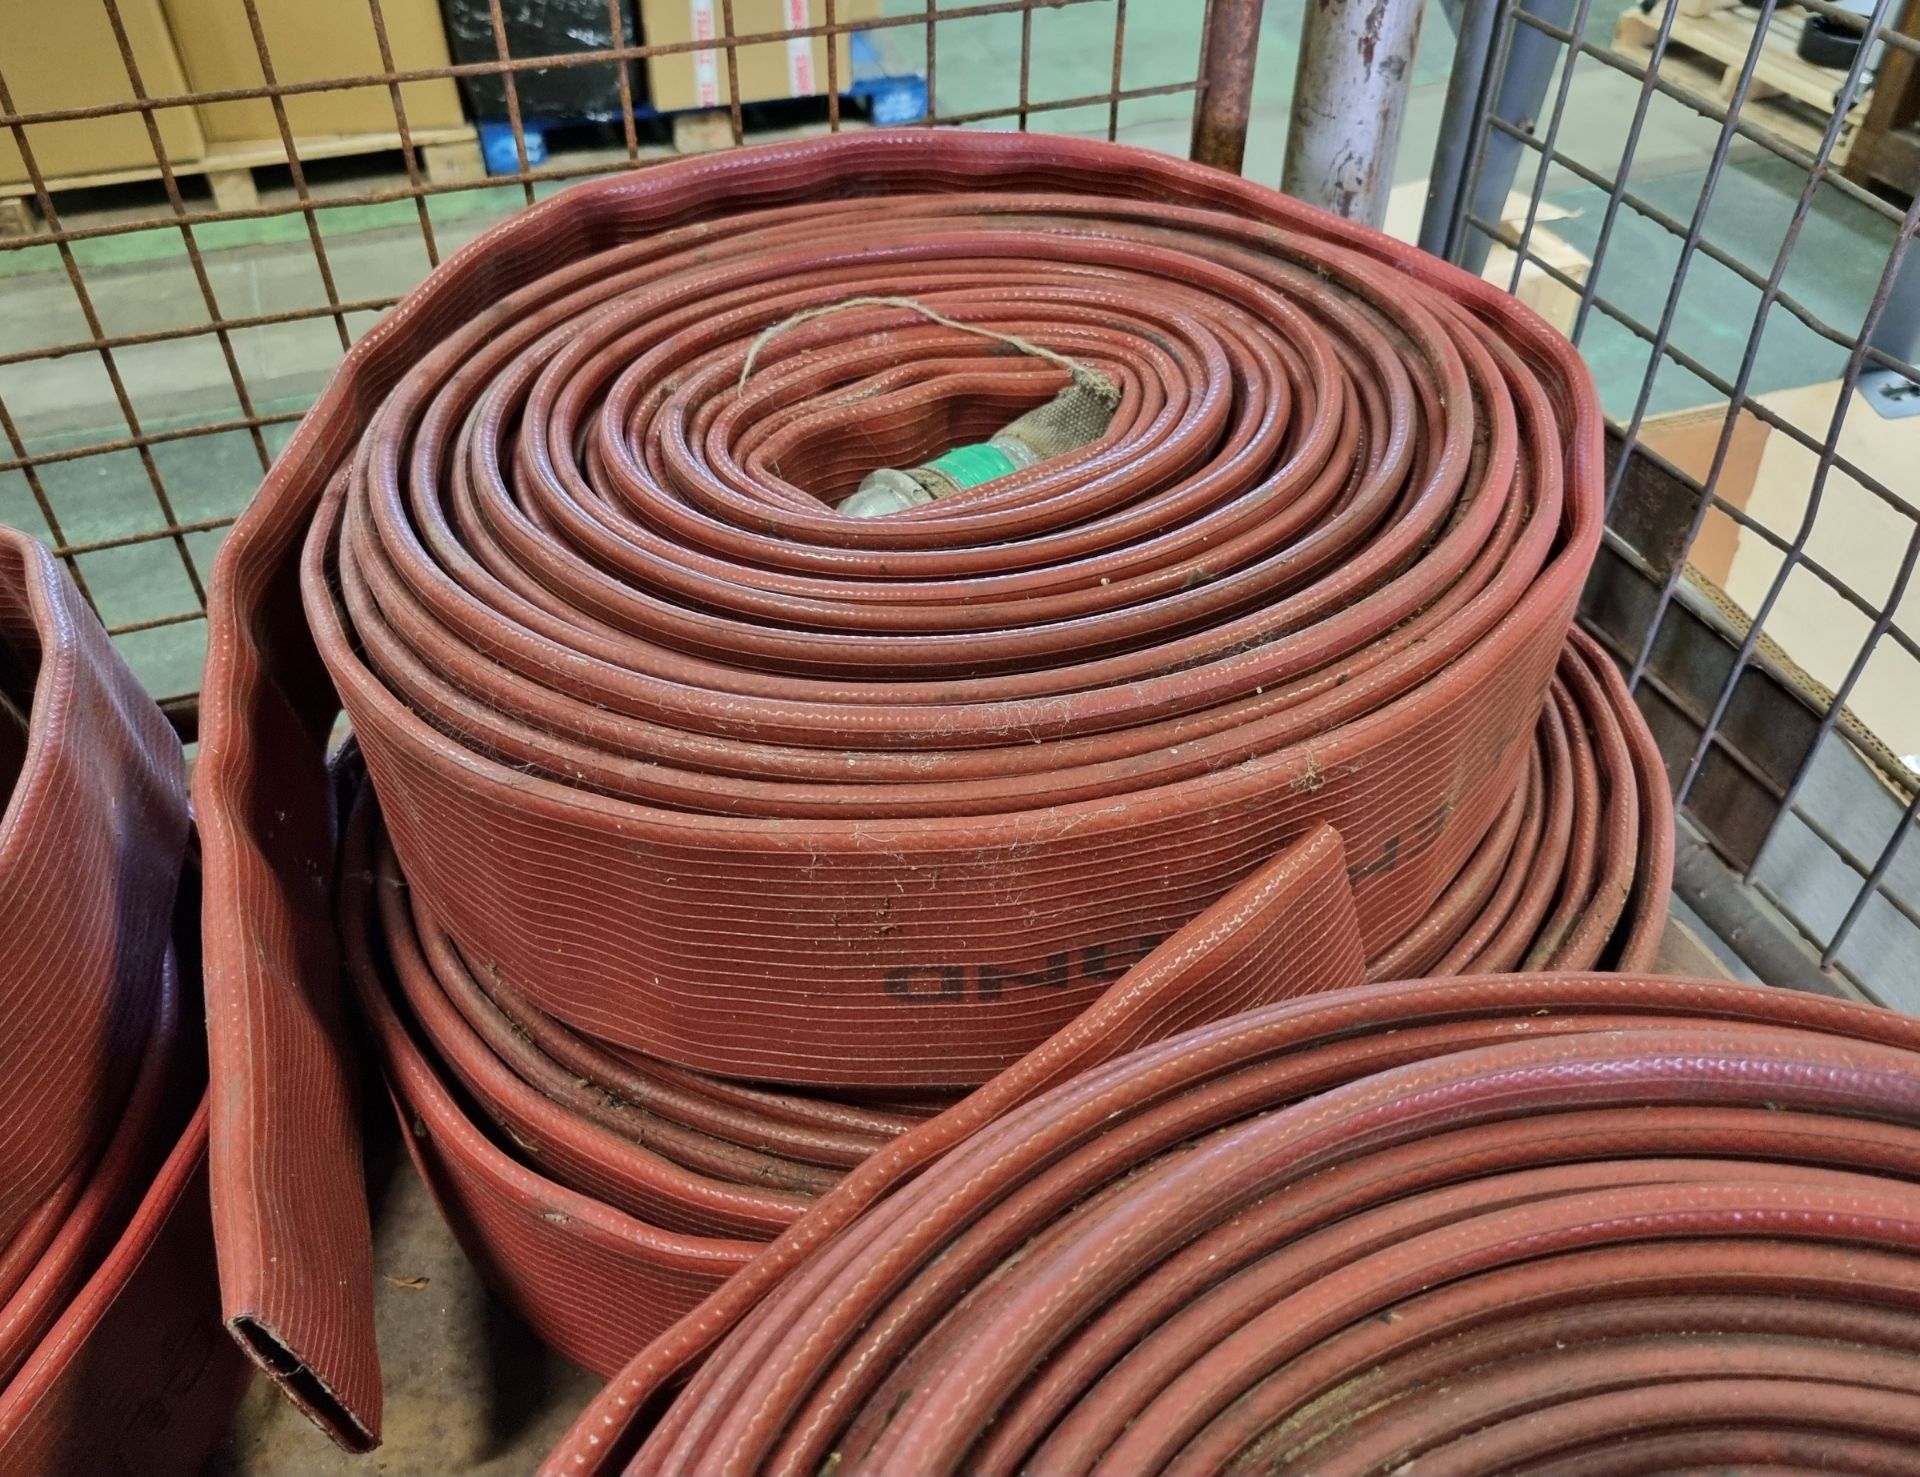 8x Angus Duraline 70mm lay flat hoses with single coupling - approx 20m in length - Image 6 of 6